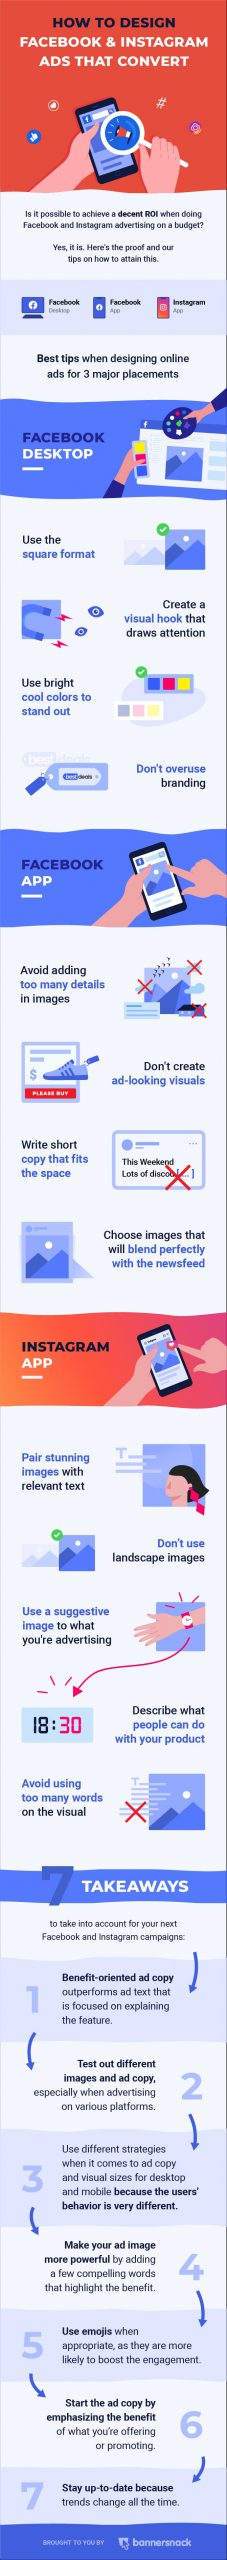 how to design compelling facebook and instagram ads that convert infographic scaled 1